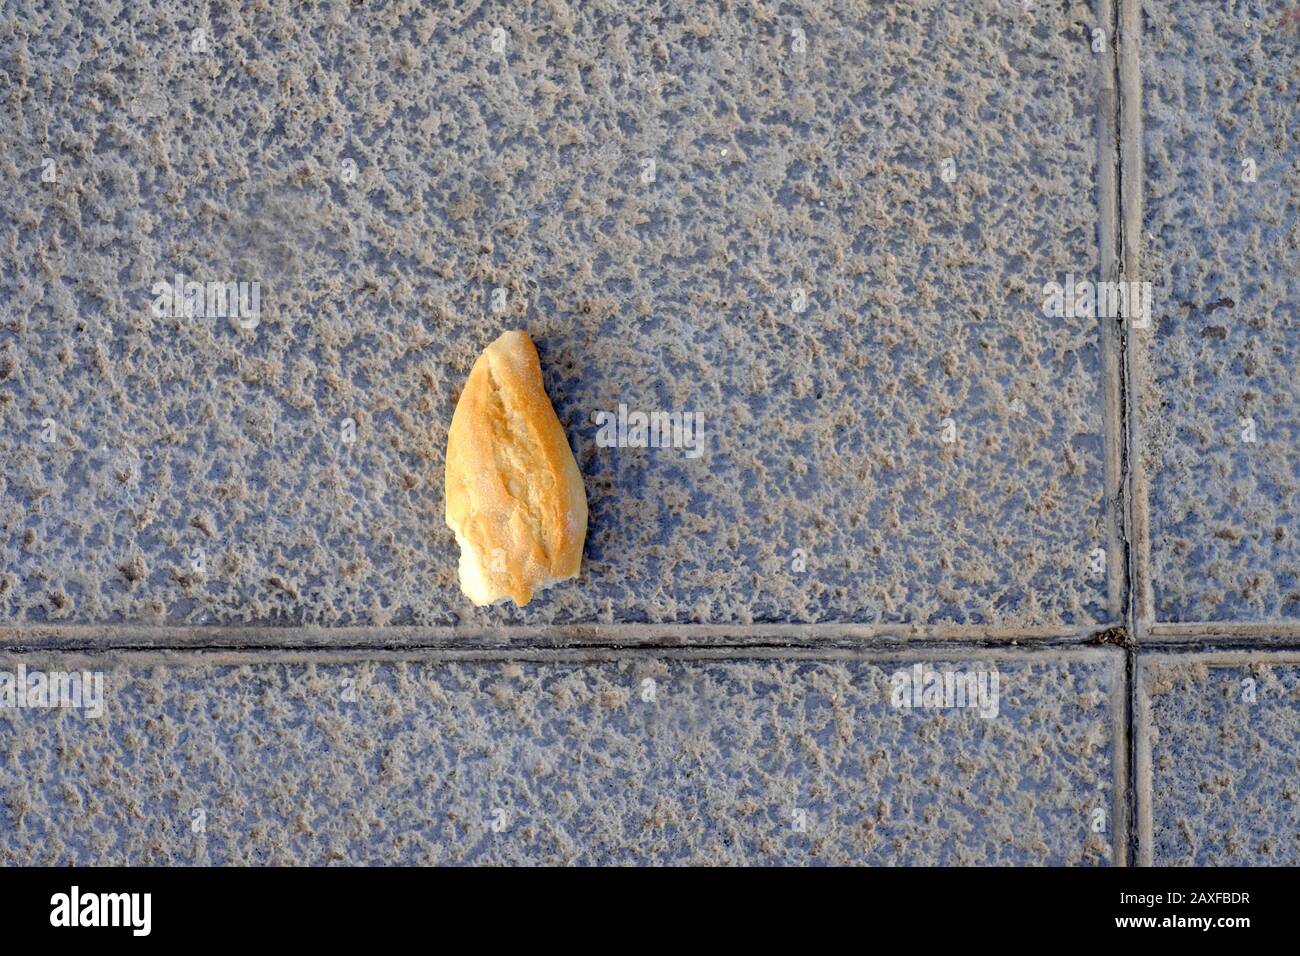 A piece of bread on the ground, food oversupply and food waste. Stock Photo